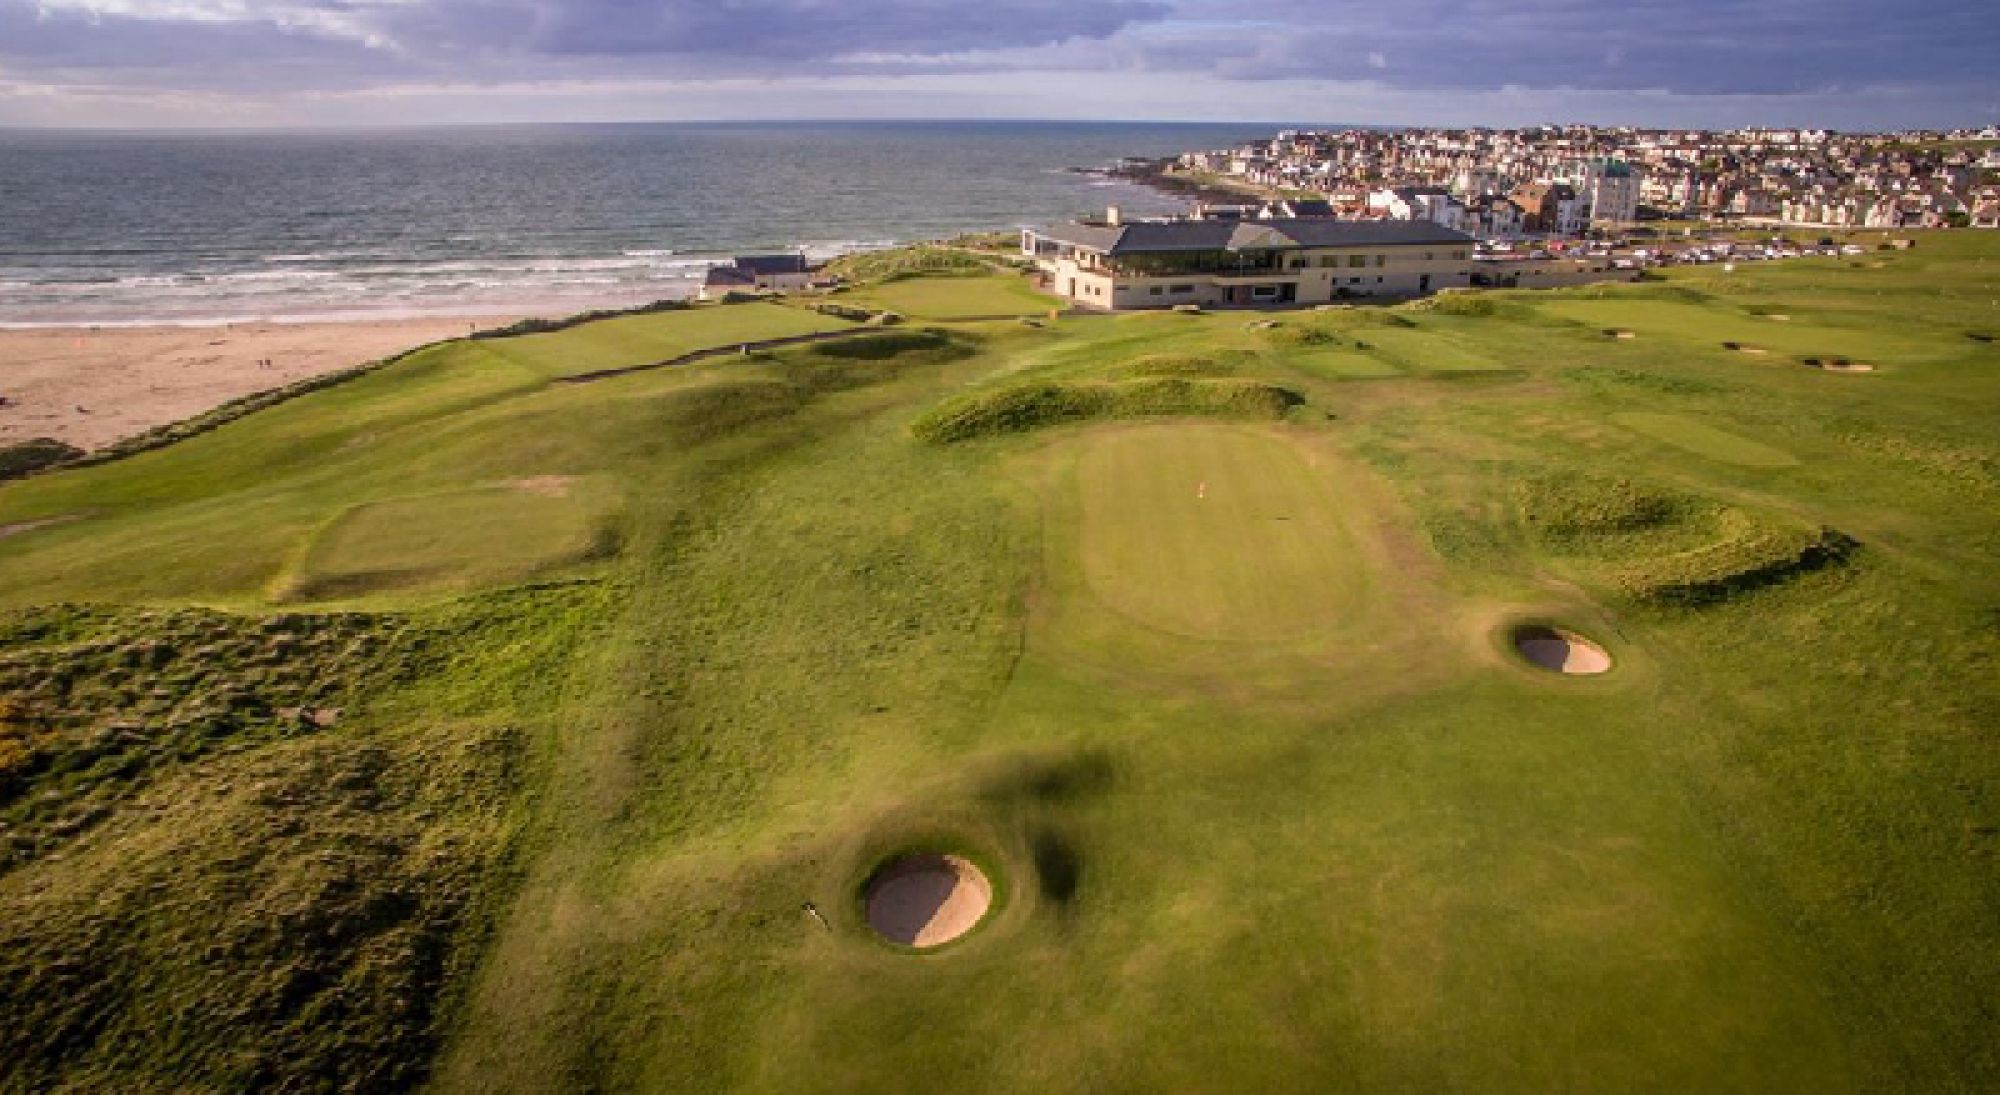 Portstewart Golf Club offers some of the premiere golf course within Northern Ireland